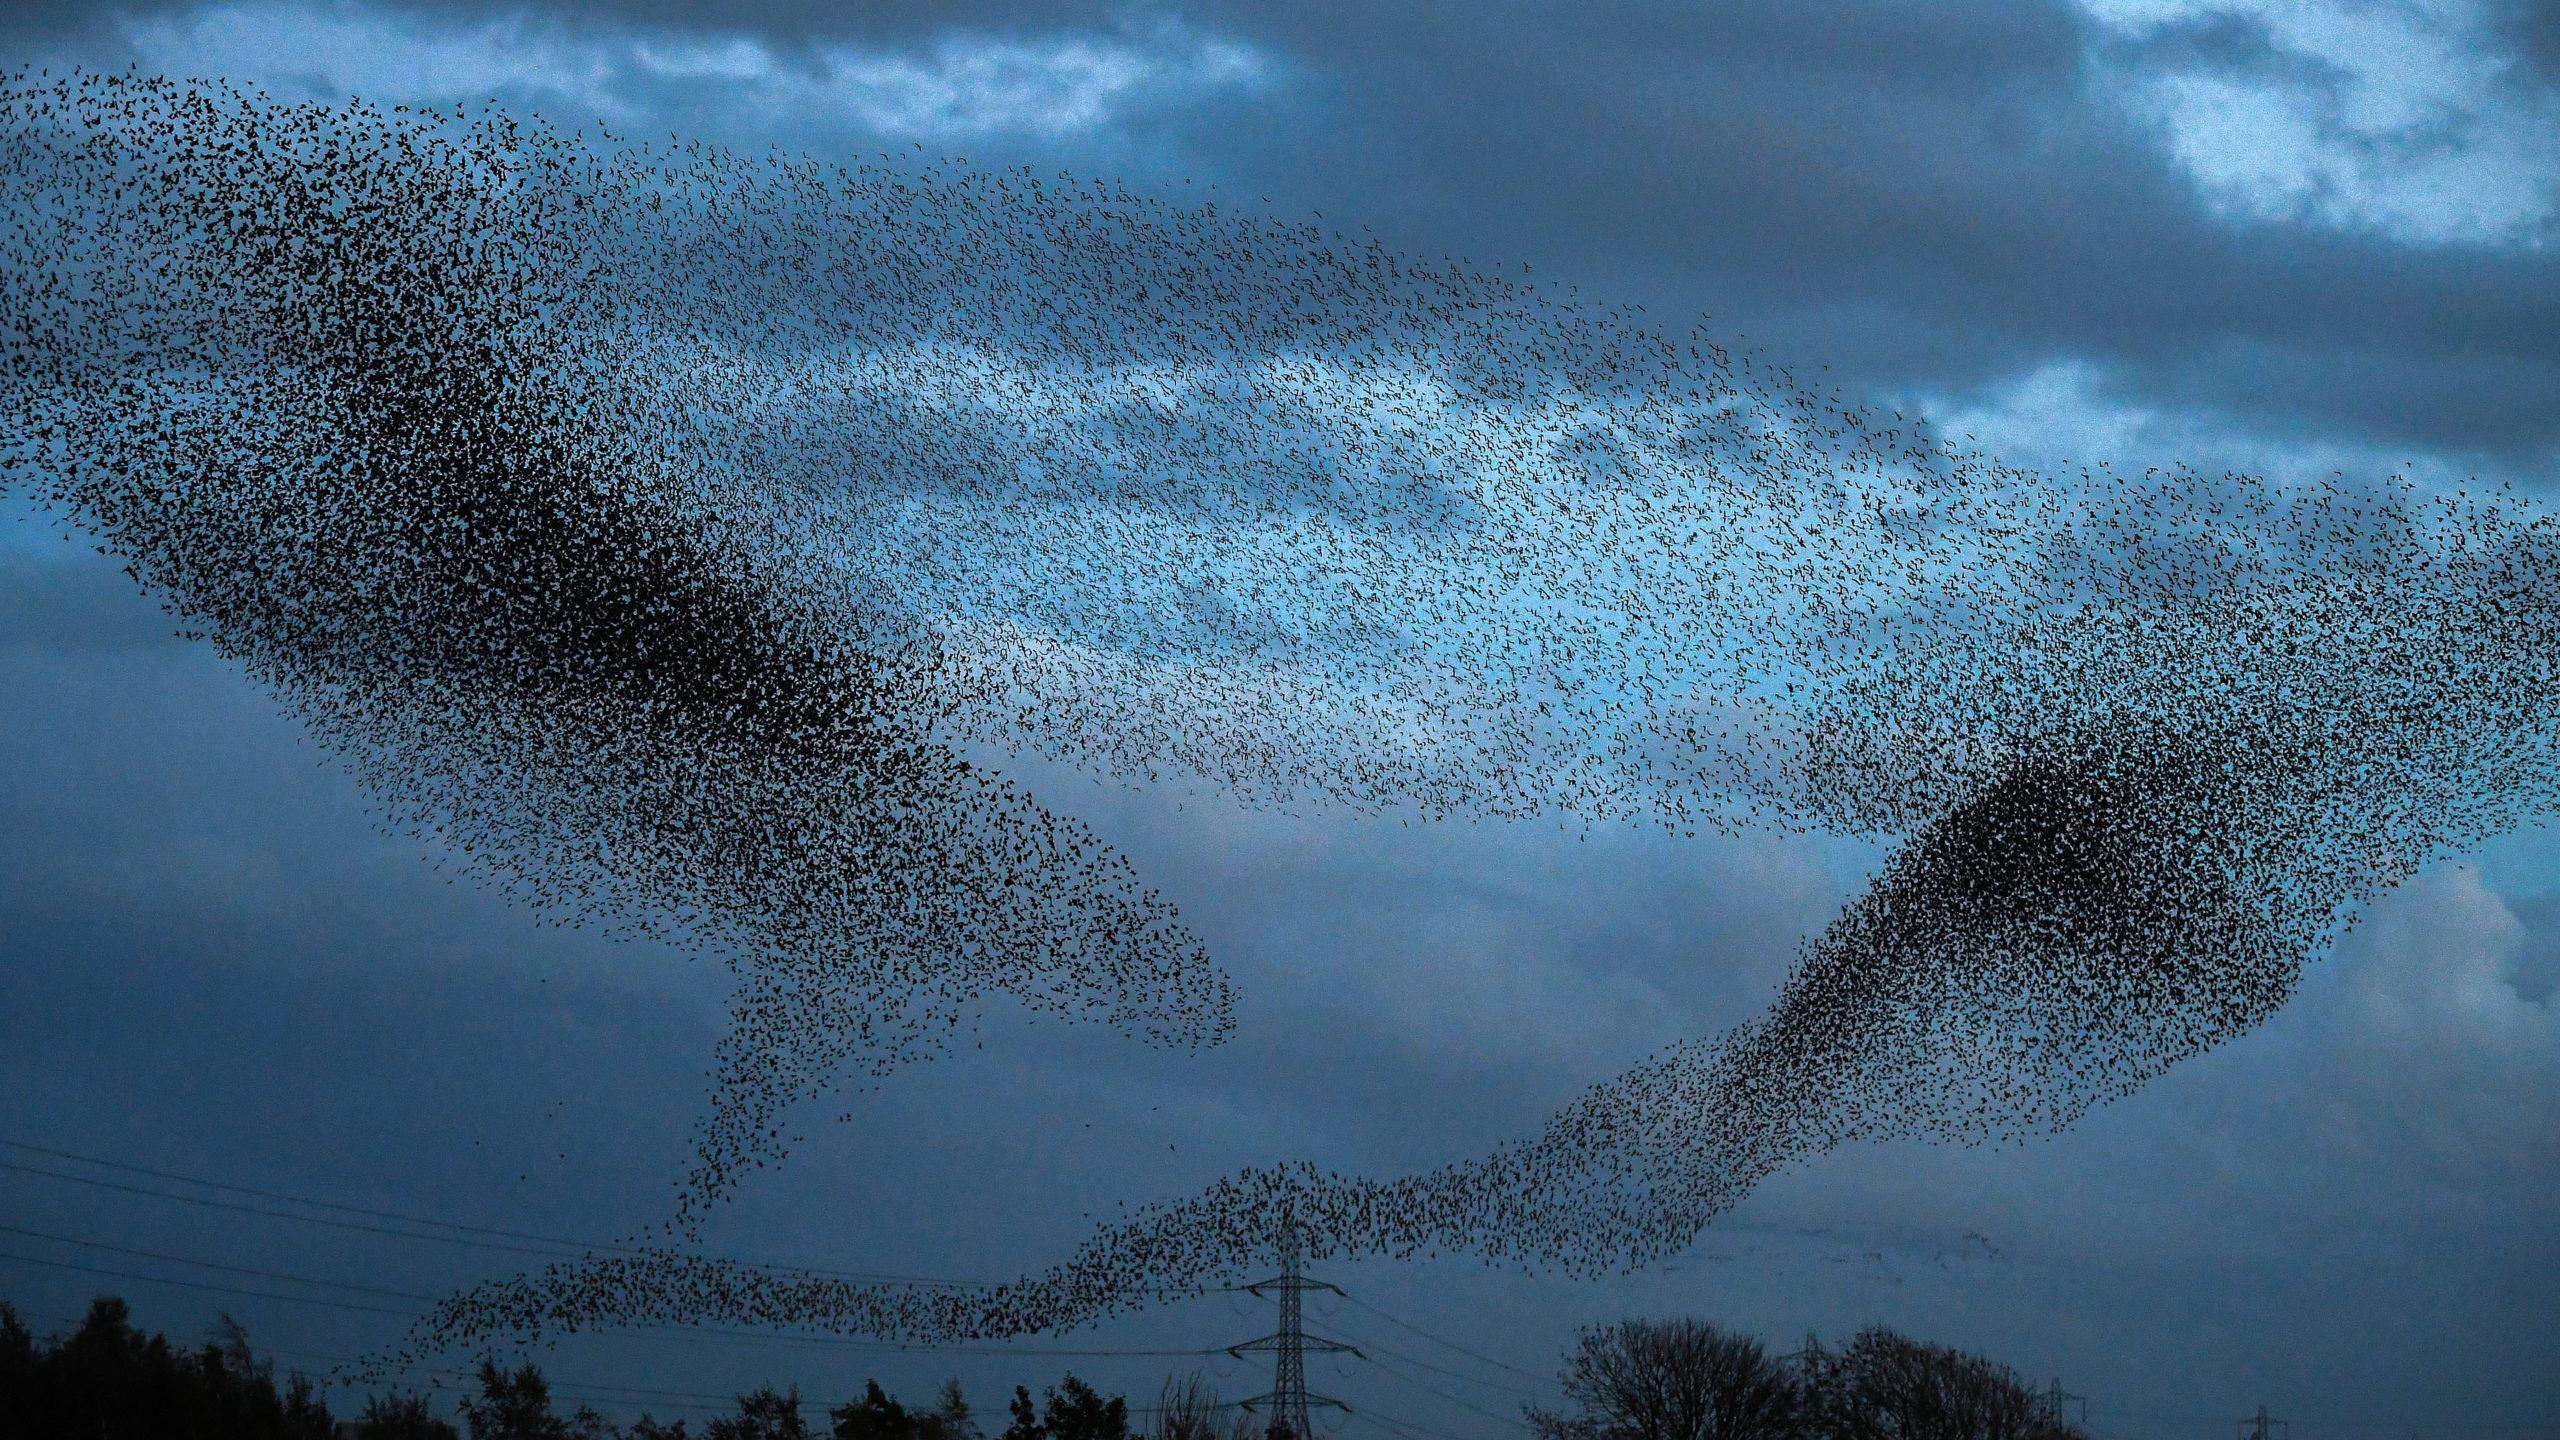 Although starlings appear to be black from a distance, their plumage also has glossy shades of purple and green. (Photo: Jeff J Mitchell, Getty Images)